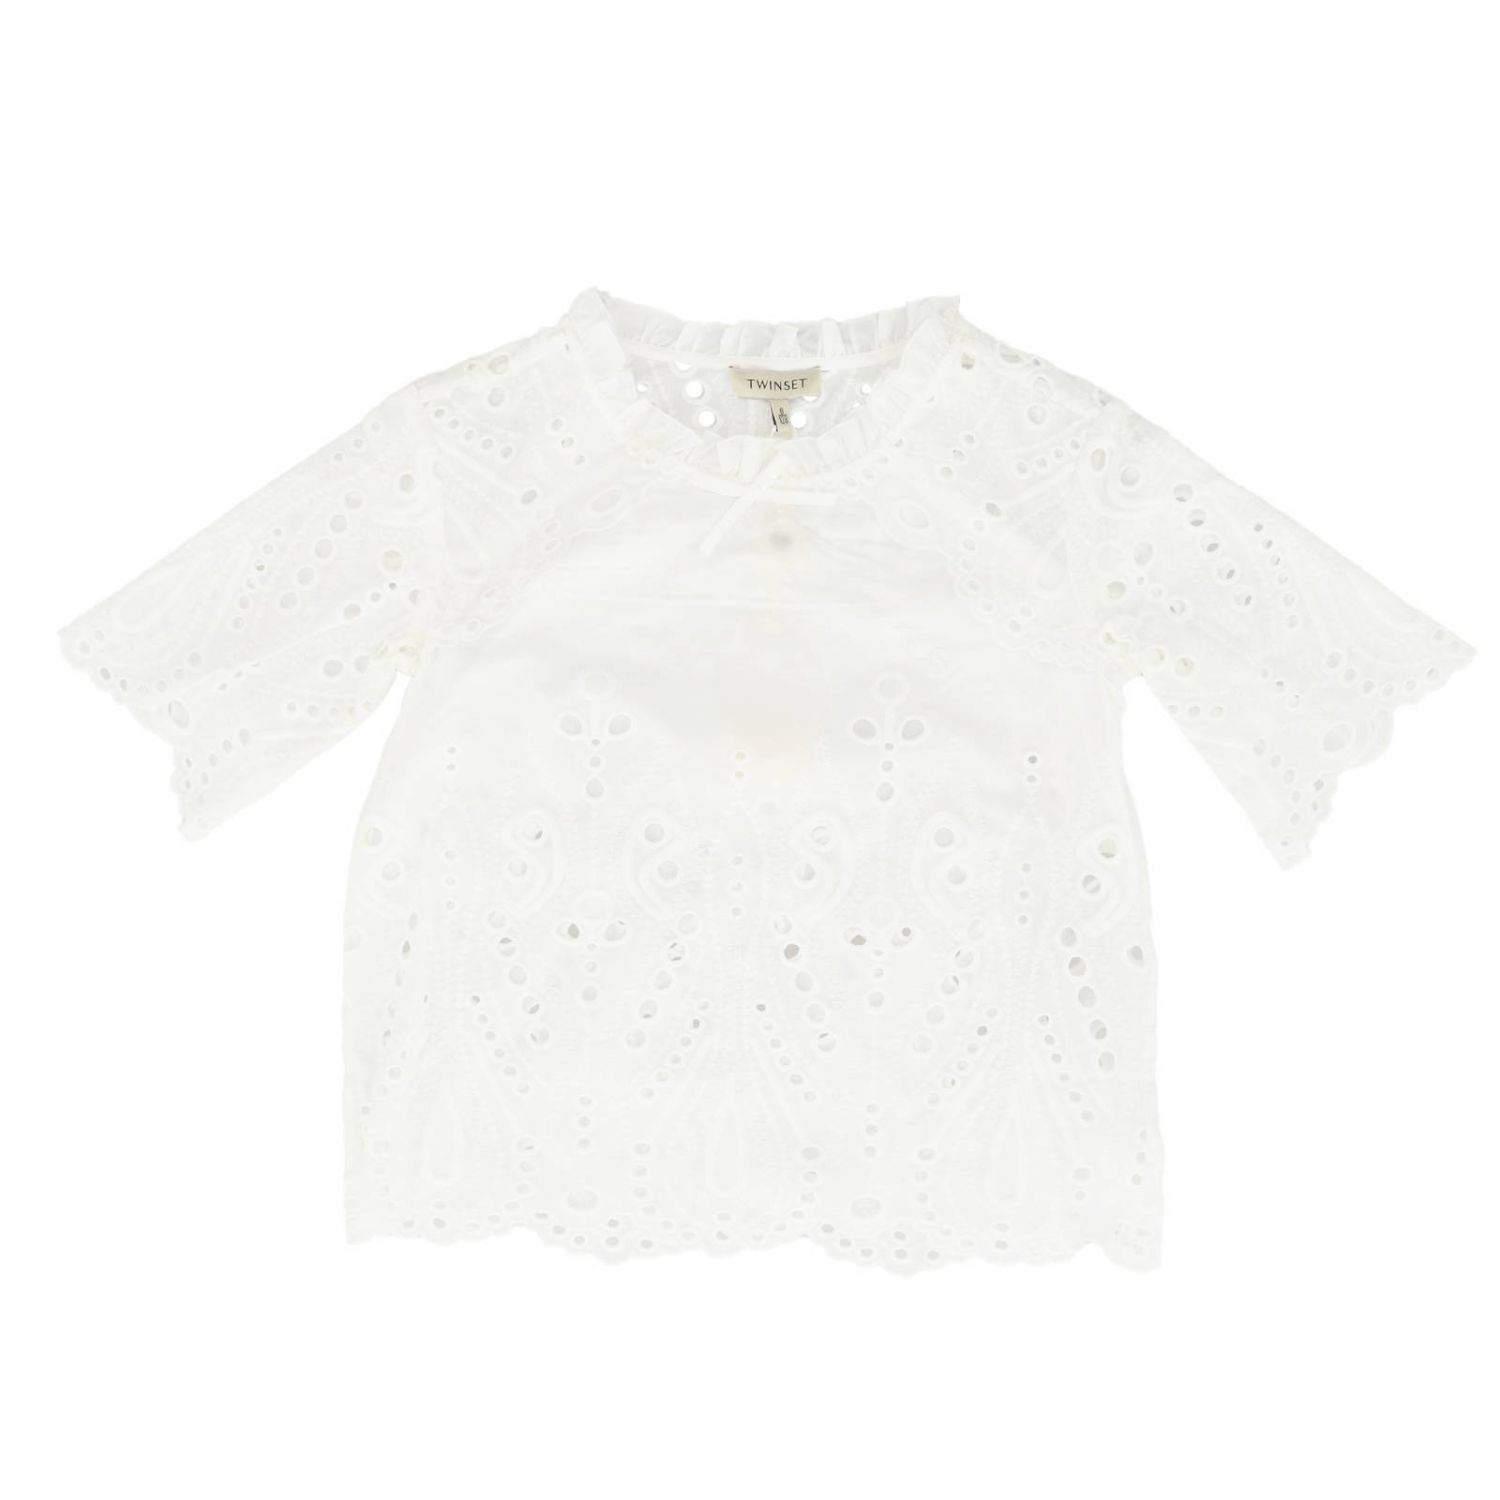 Twinset Outlet: top for girls - White | Twinset top 191GJ2622 online on ...